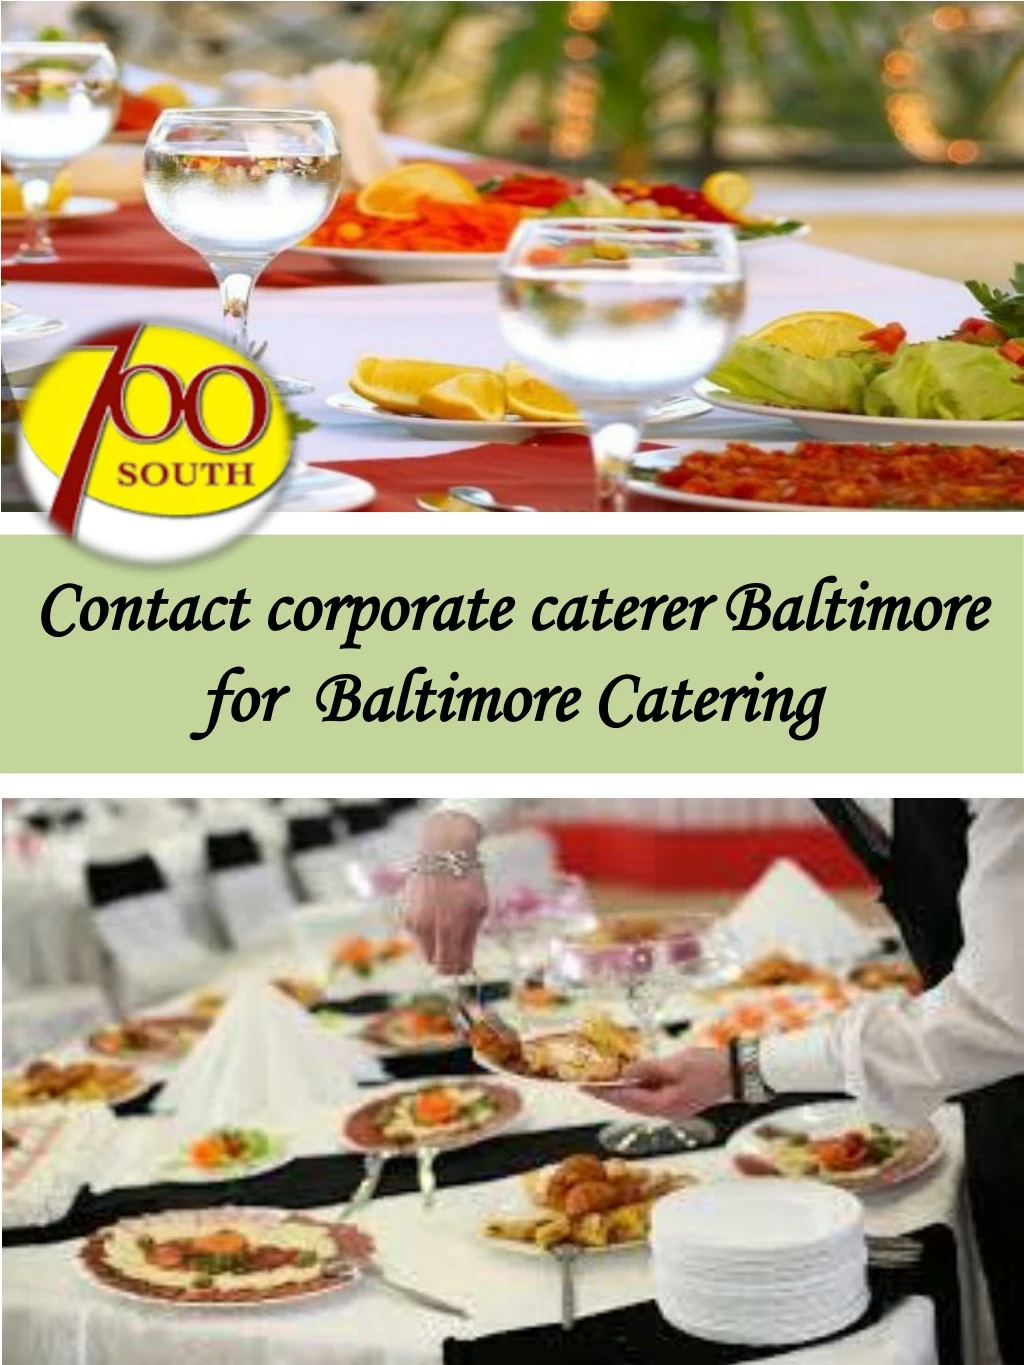 contact corporate caterer baltimore for baltimore catering